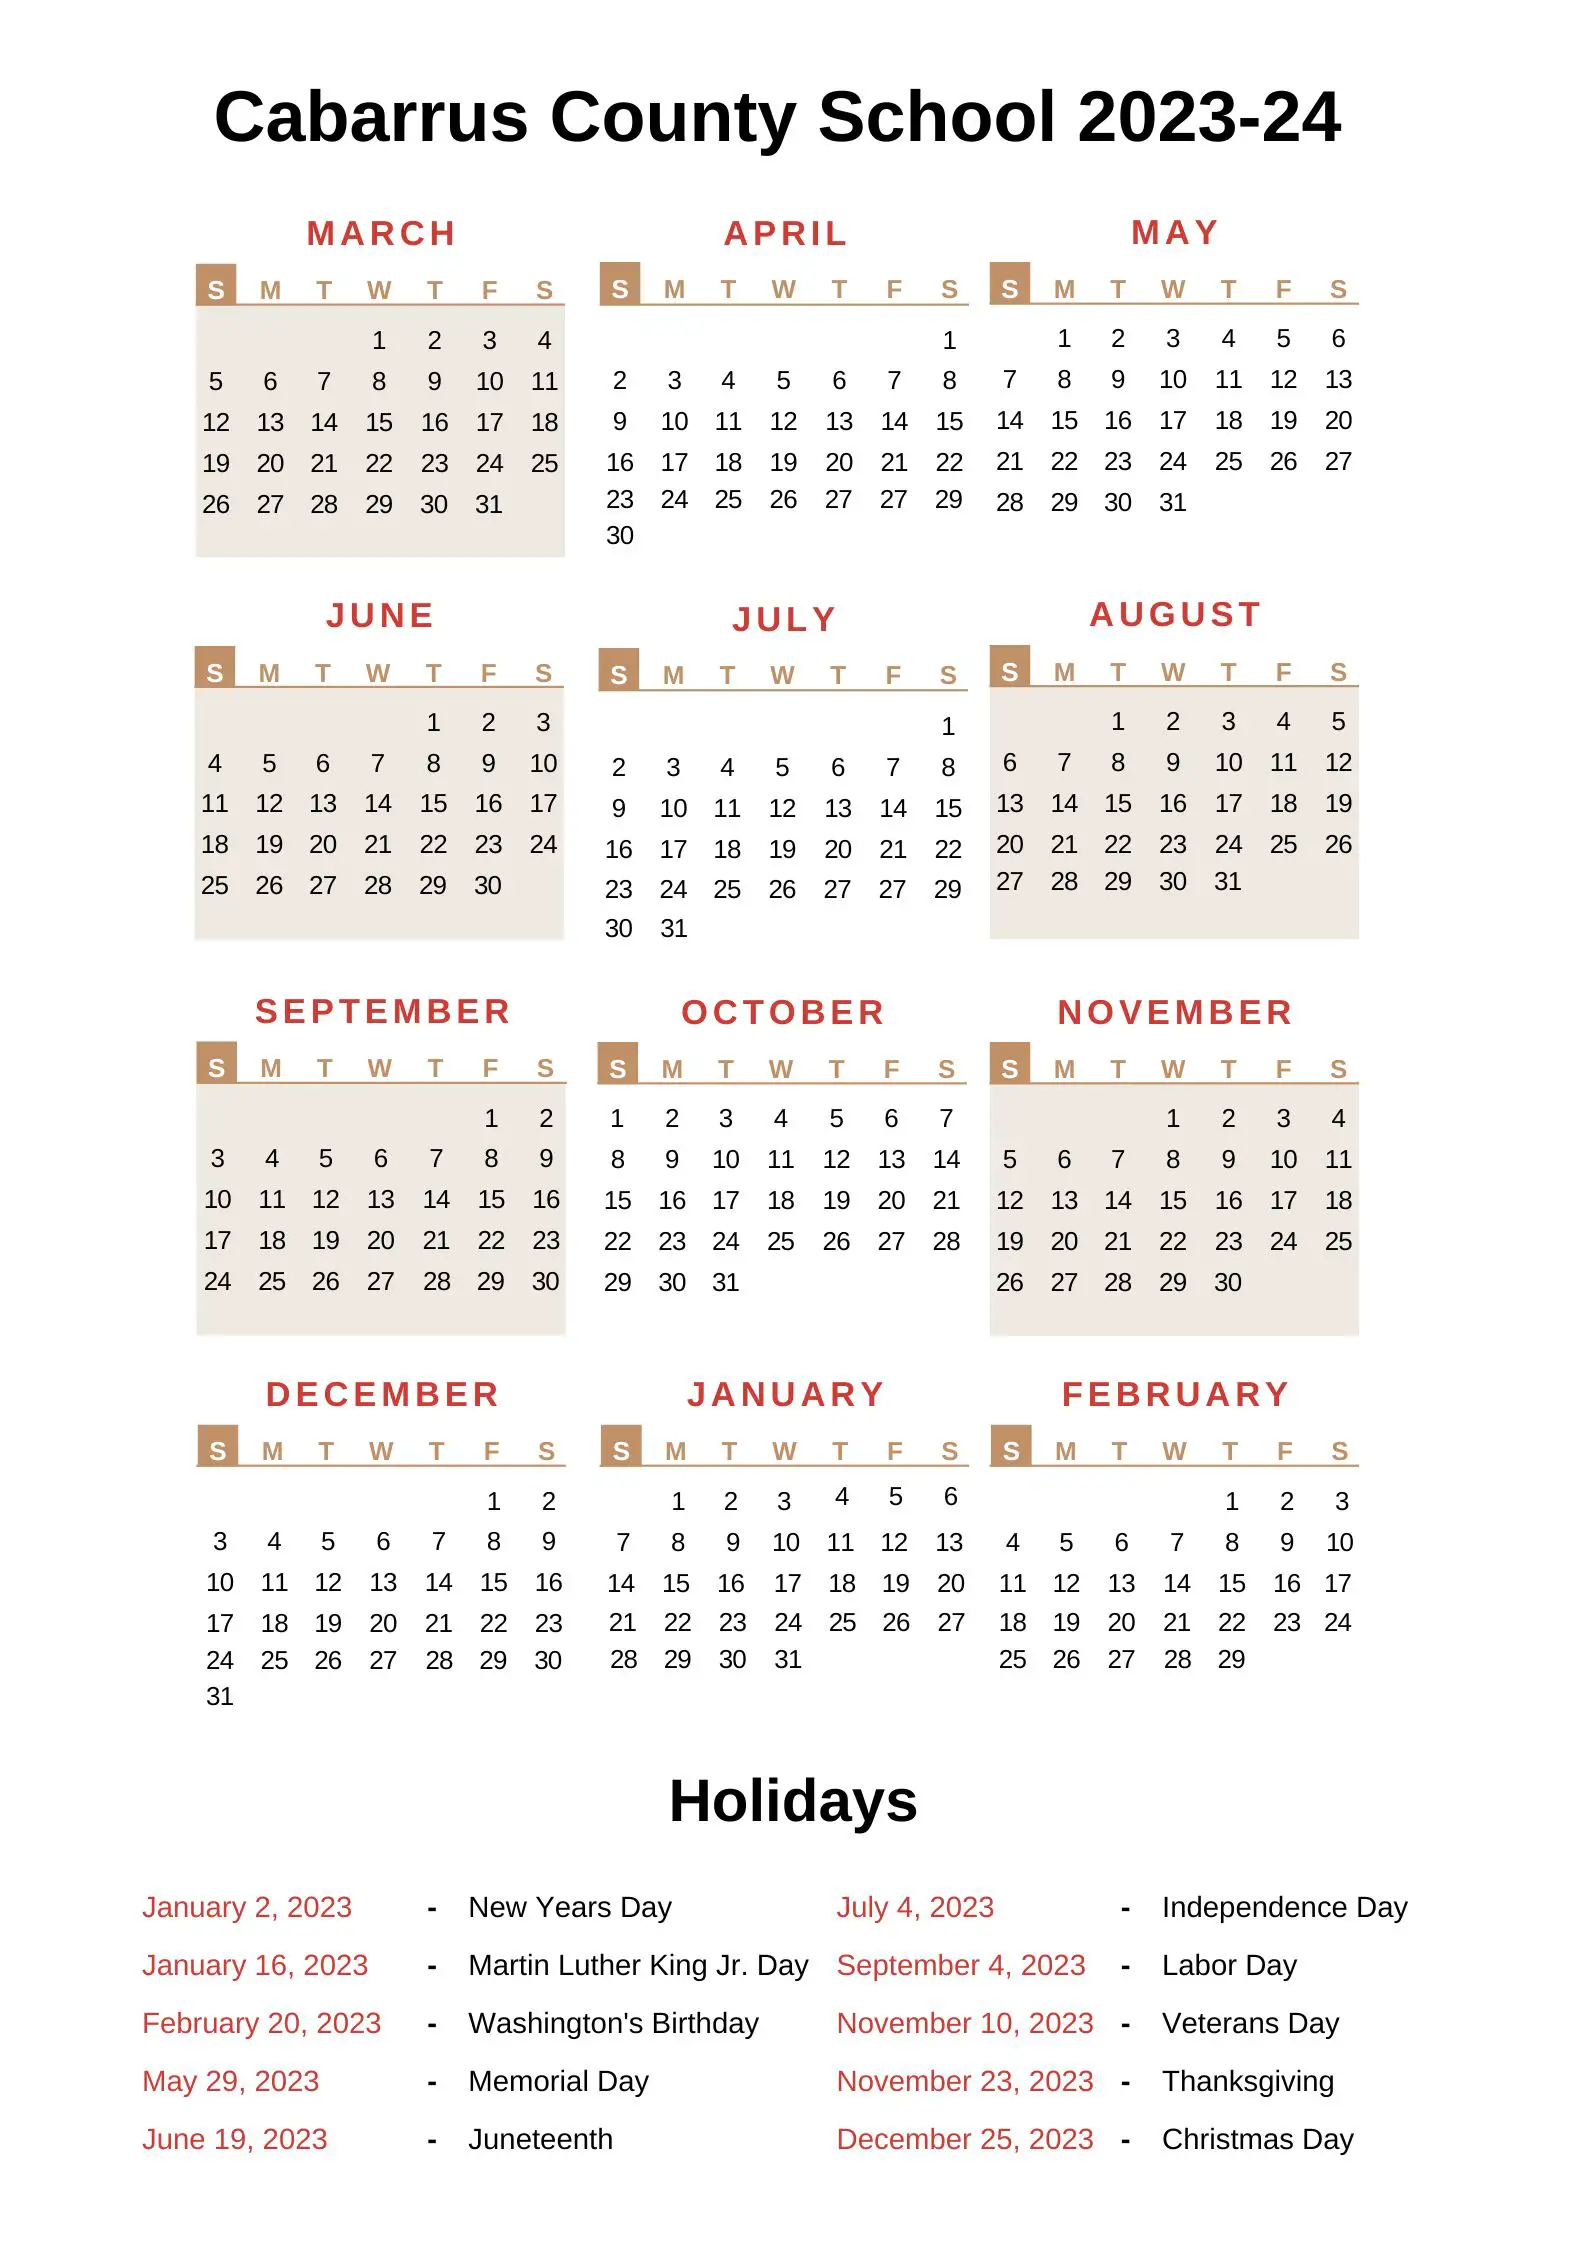 Cabarrus County Schools Calendar 2023-24 with Holidays